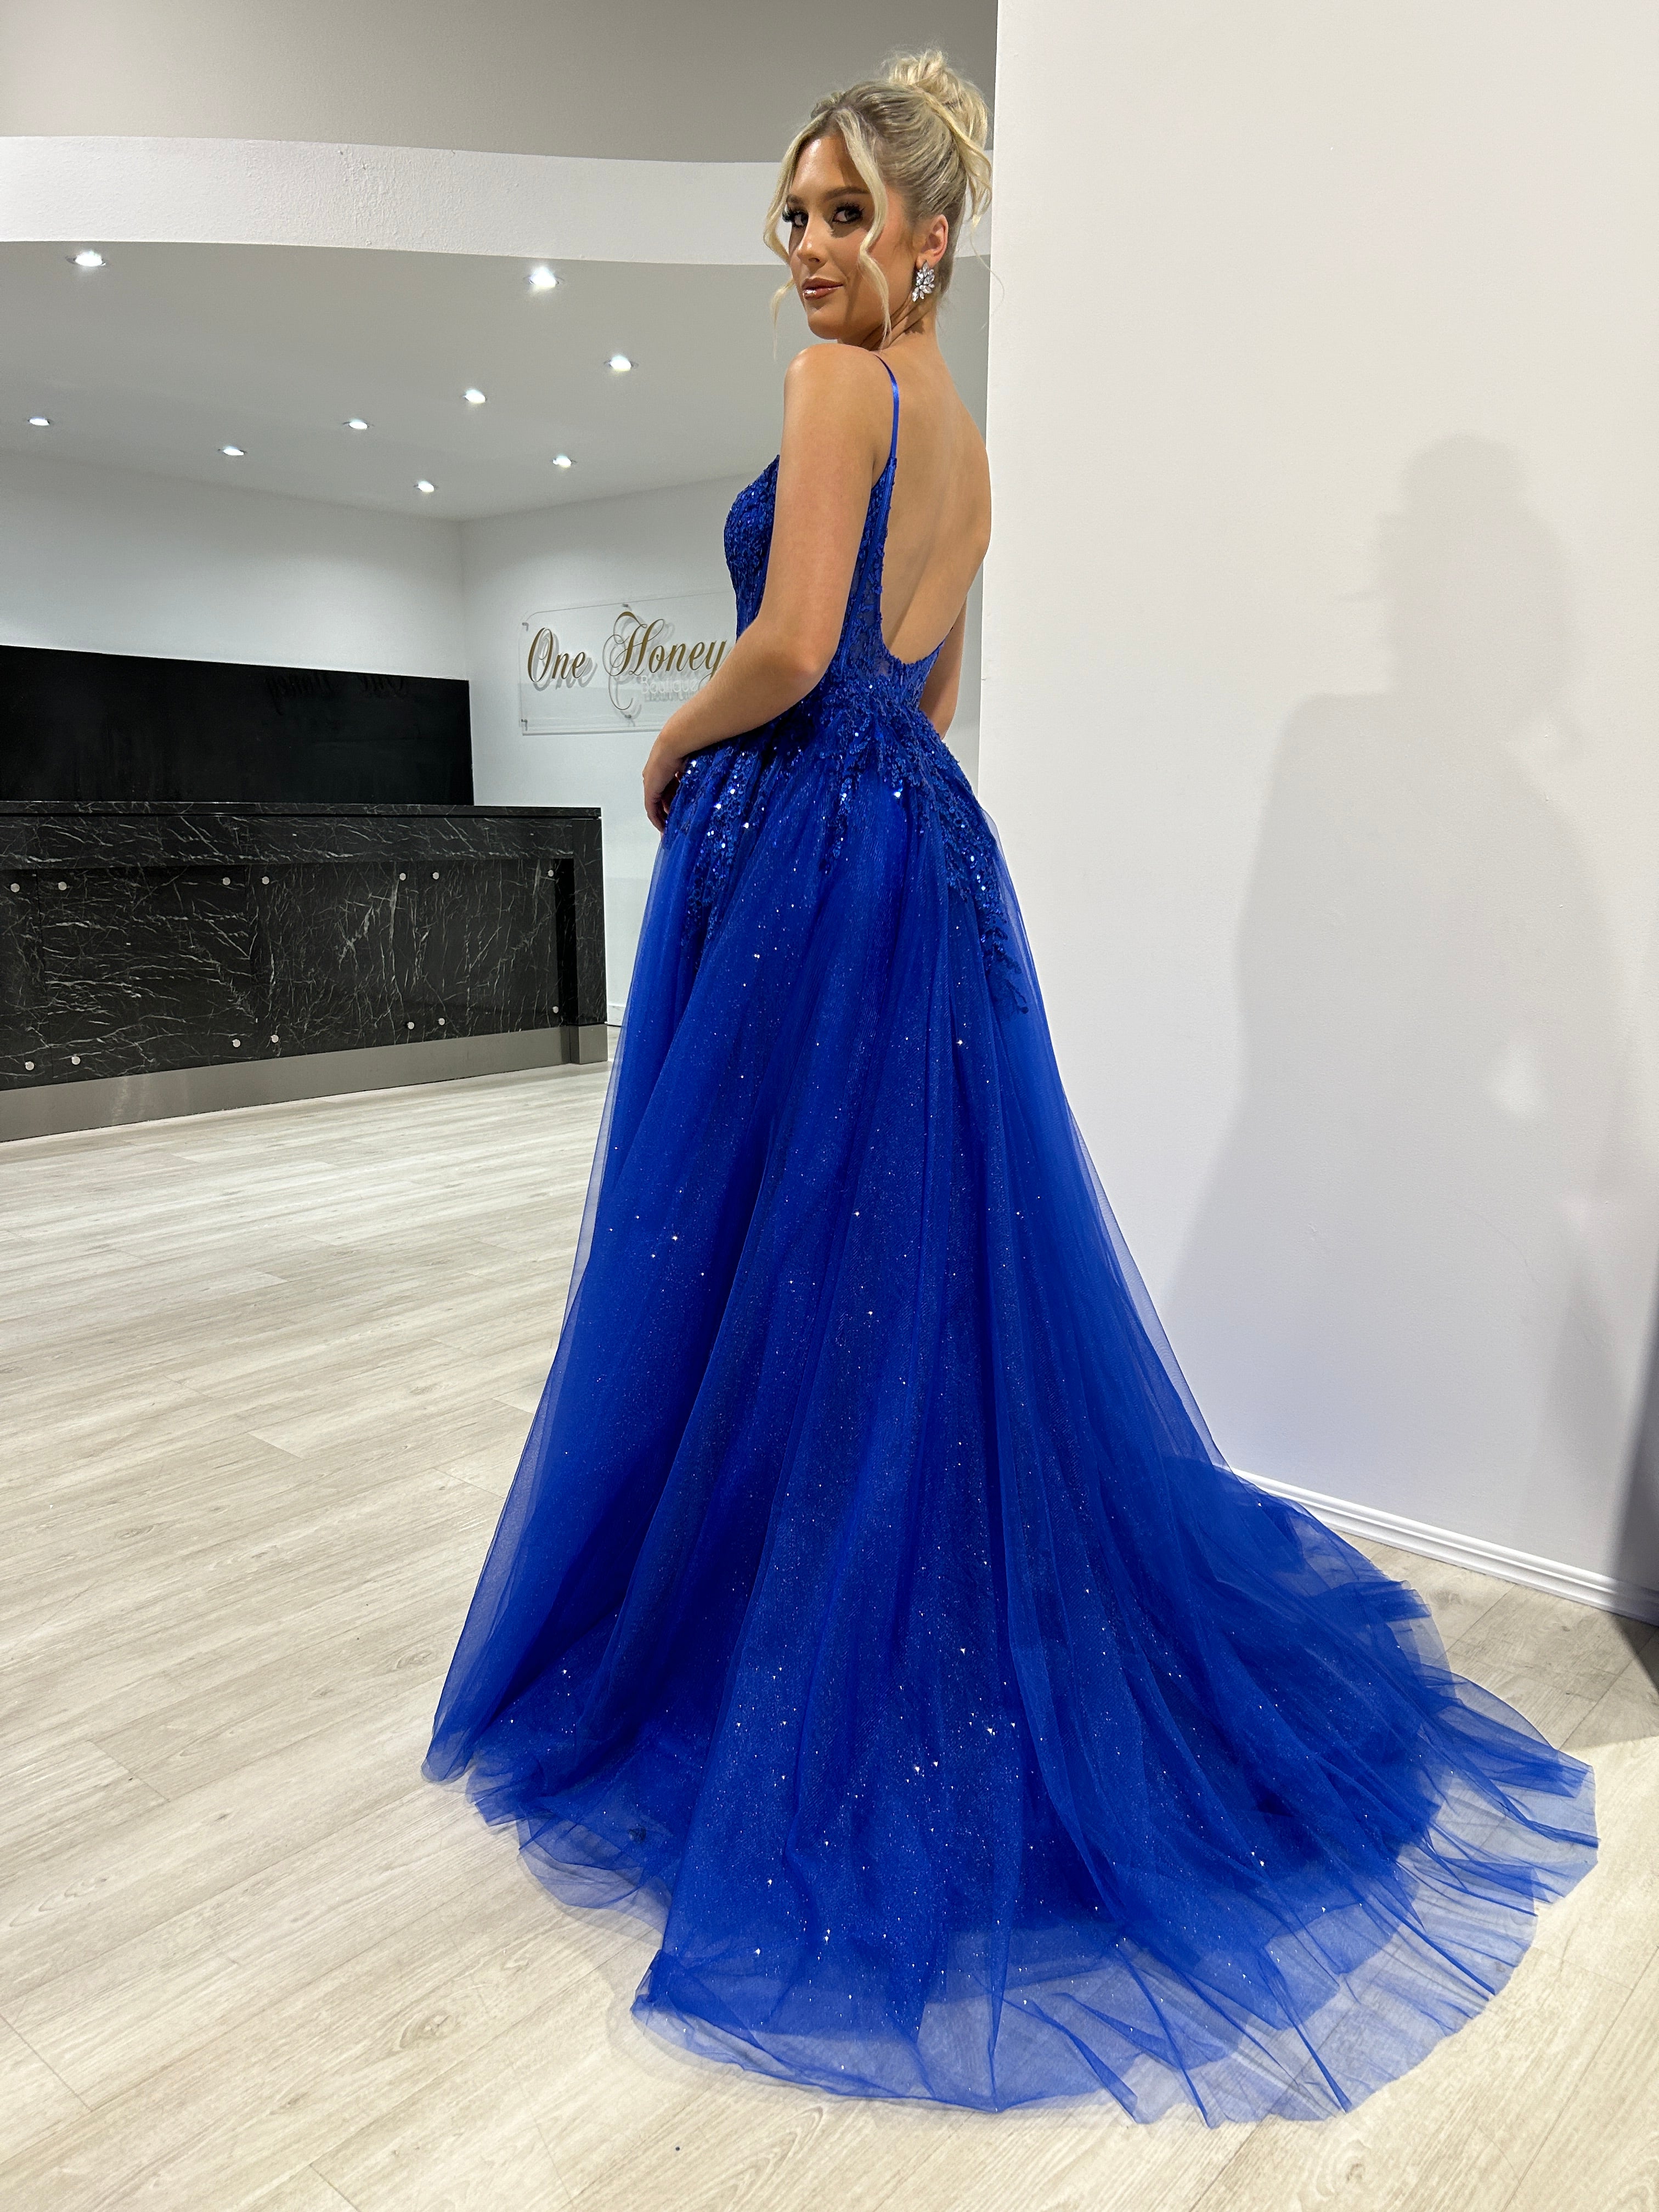 Honey Couture PANDORA Royal Blue Tulle Bustier Ball Gown Formal Dress